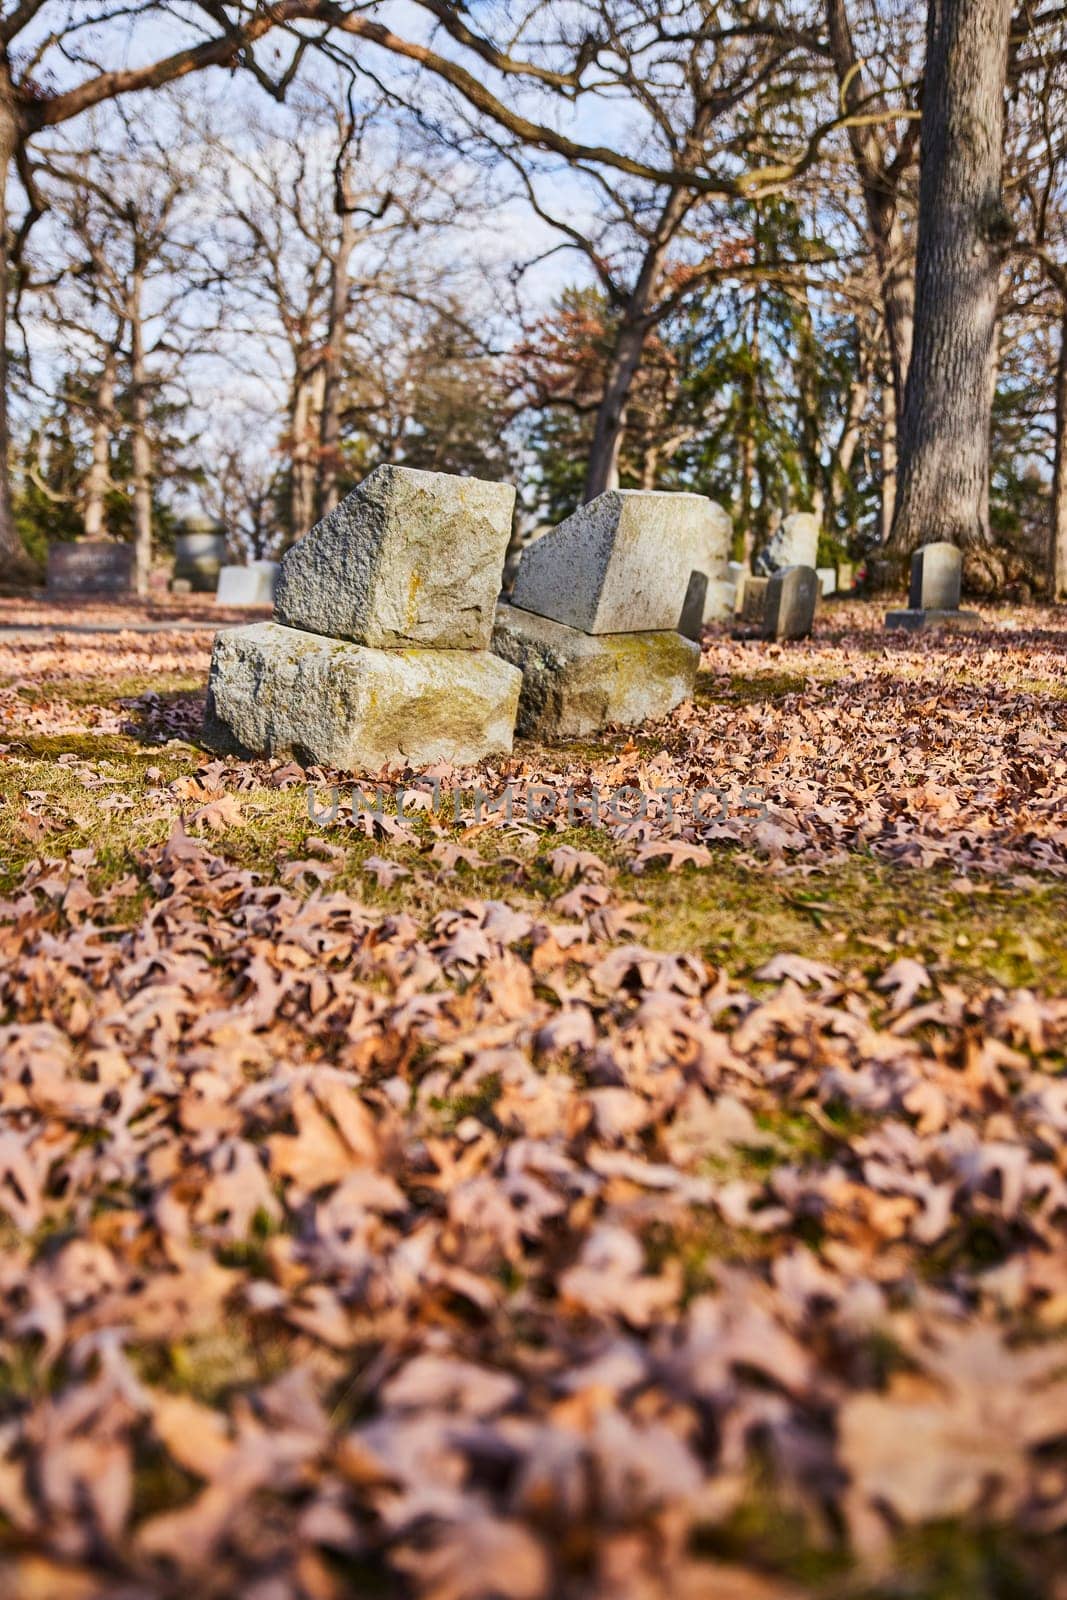 Fallen gravestones amidst autumn leaves in Lindenwood Cemetery, Indiana, capturing the serene melancholy of time's passage.